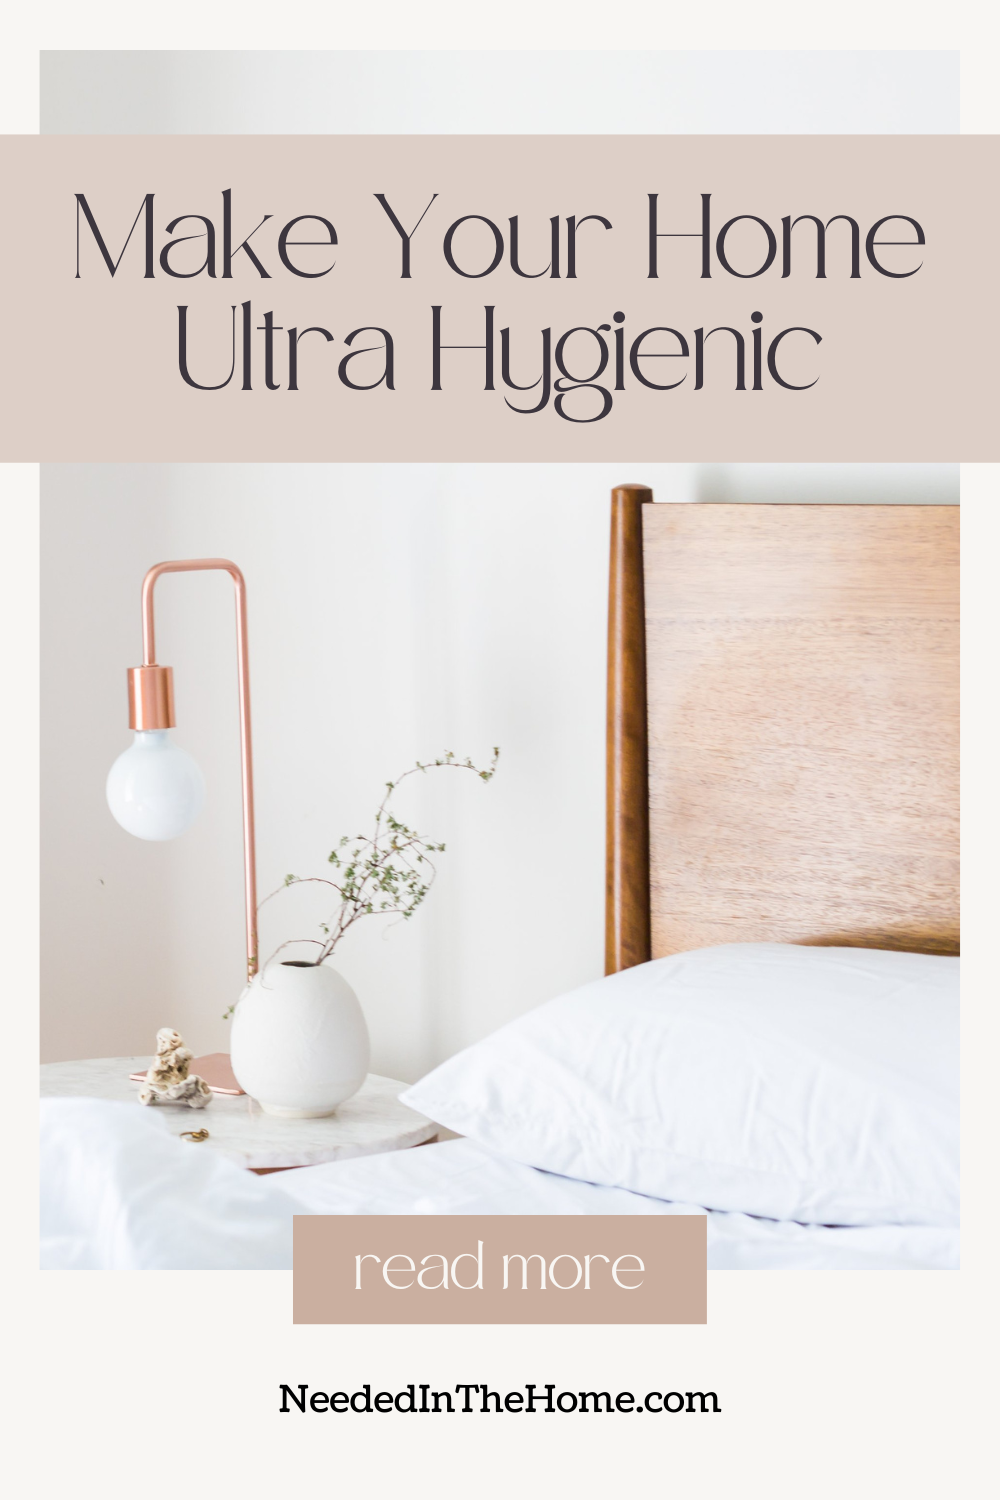 pinterest-pin-description make your home ultra hygienic lamp nightstand bed clean sheets pillow read more neededinthehome